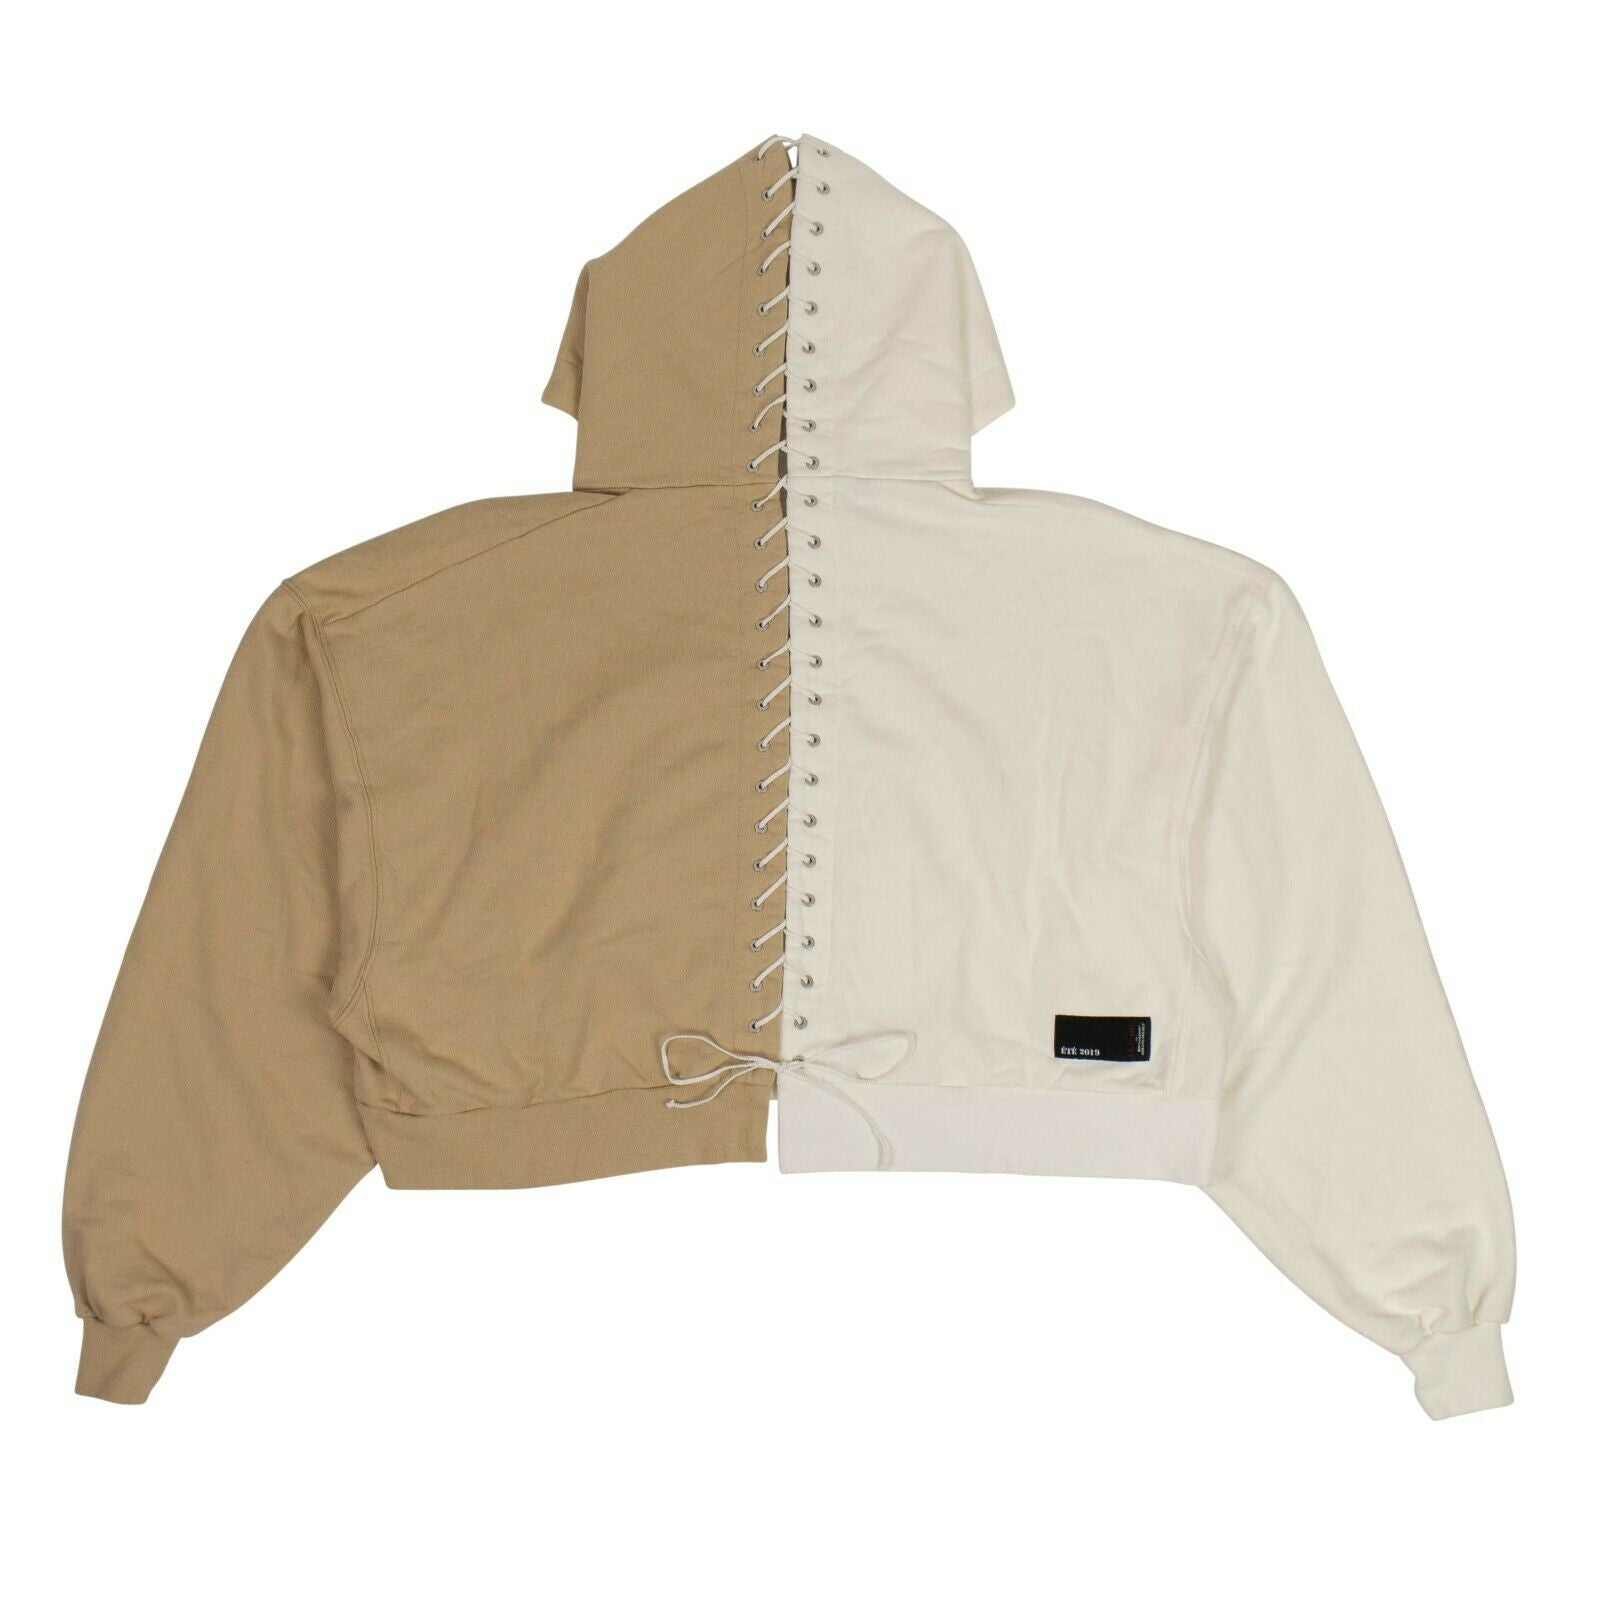 Unravel Project Lace-Up Hoodie Sweatshirt - Beige/White